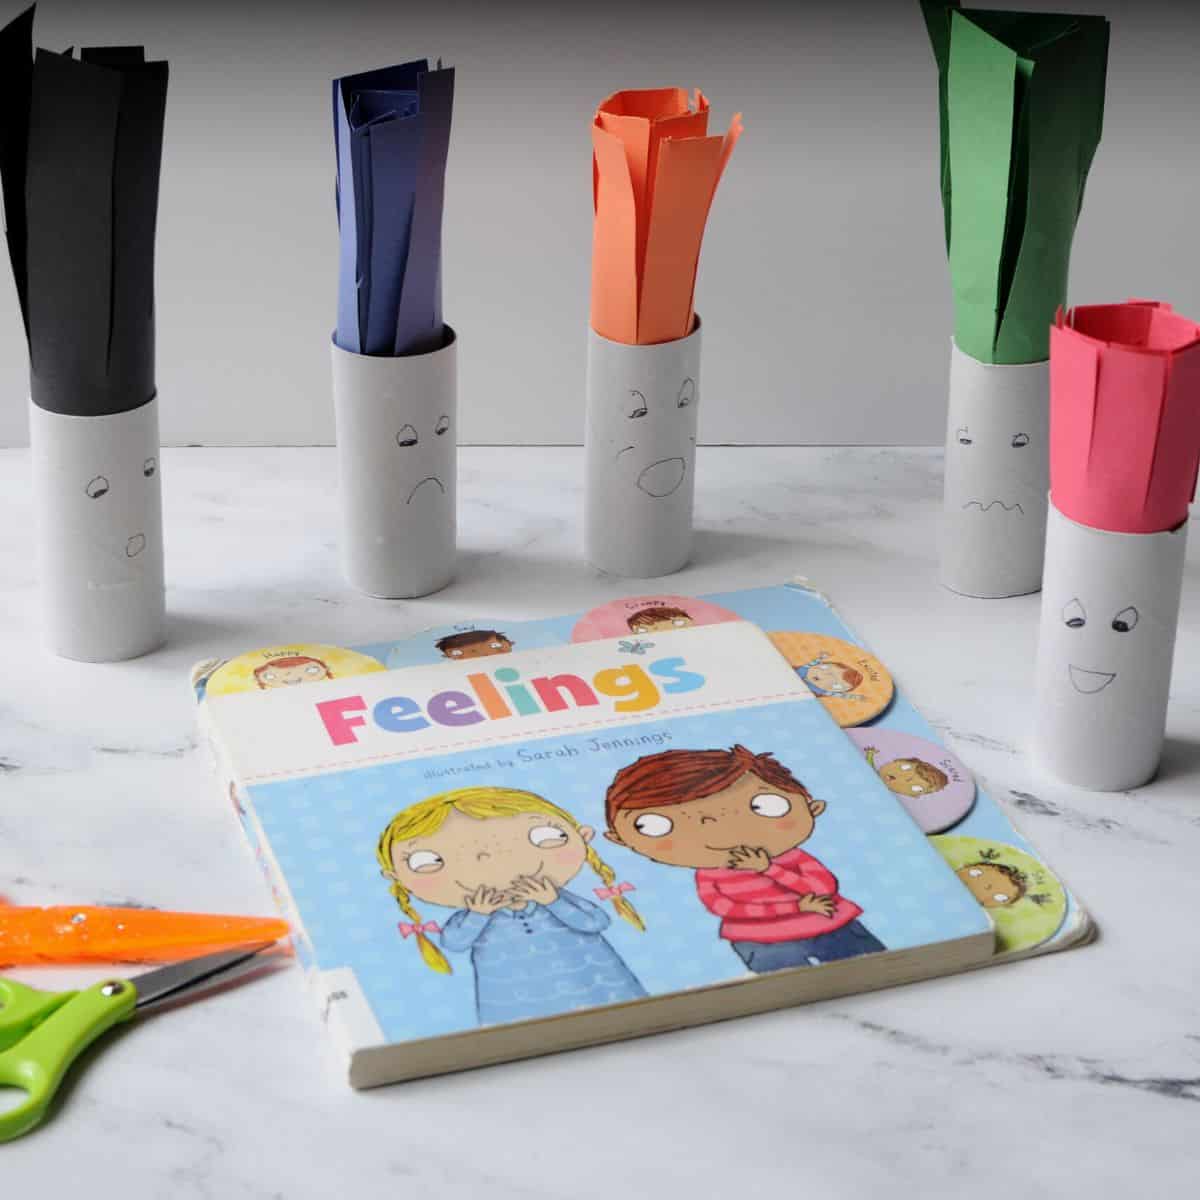 book about feelings and then toilet paper rolls made to look like people with faces. They have construction paper hair and there are safety scissors near them. 